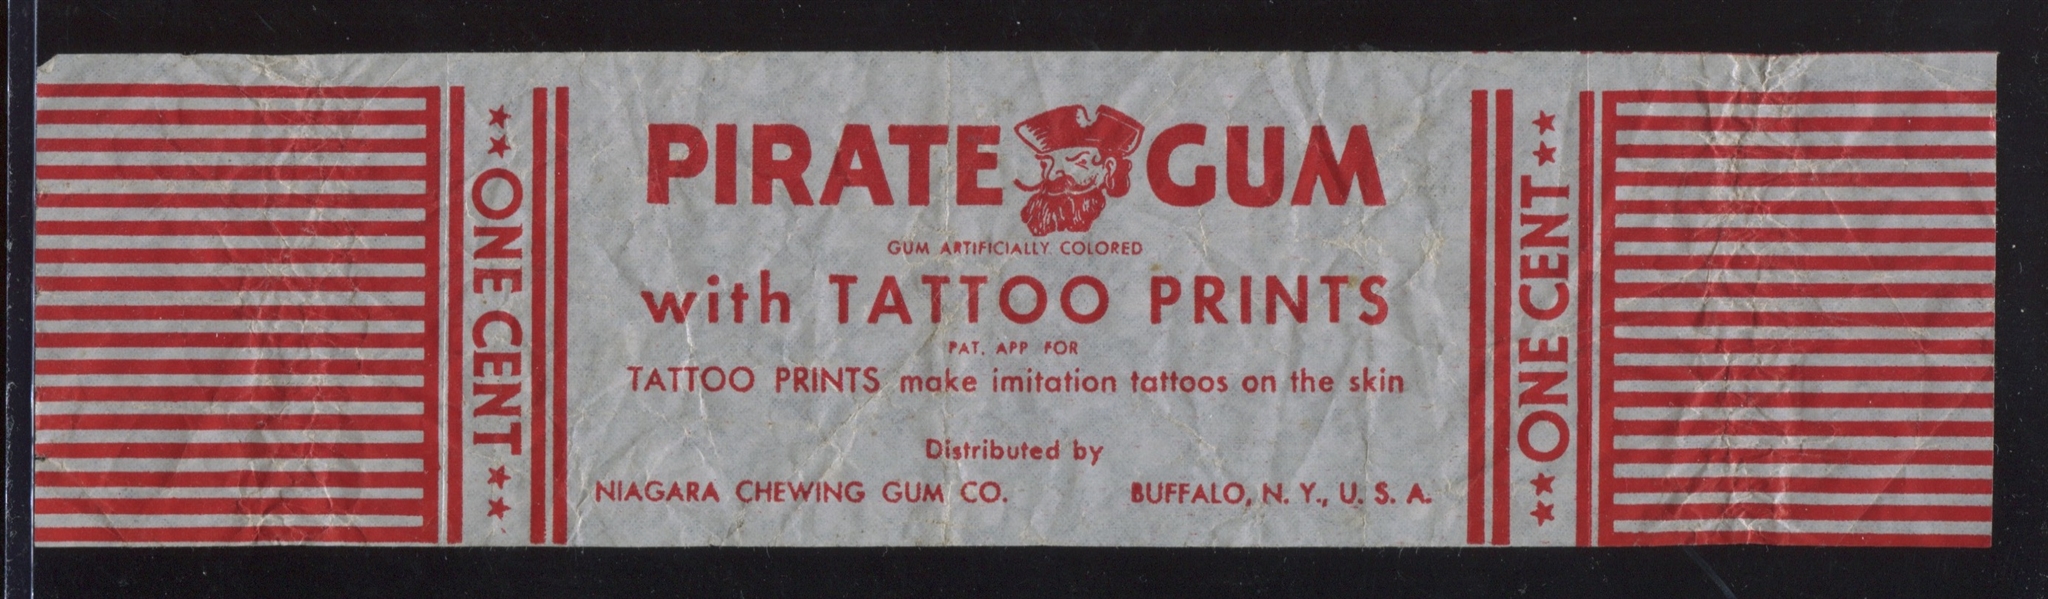 R148 Niagara Chewing Gum Tattoo Prints Wrapper - Only Known Specimen